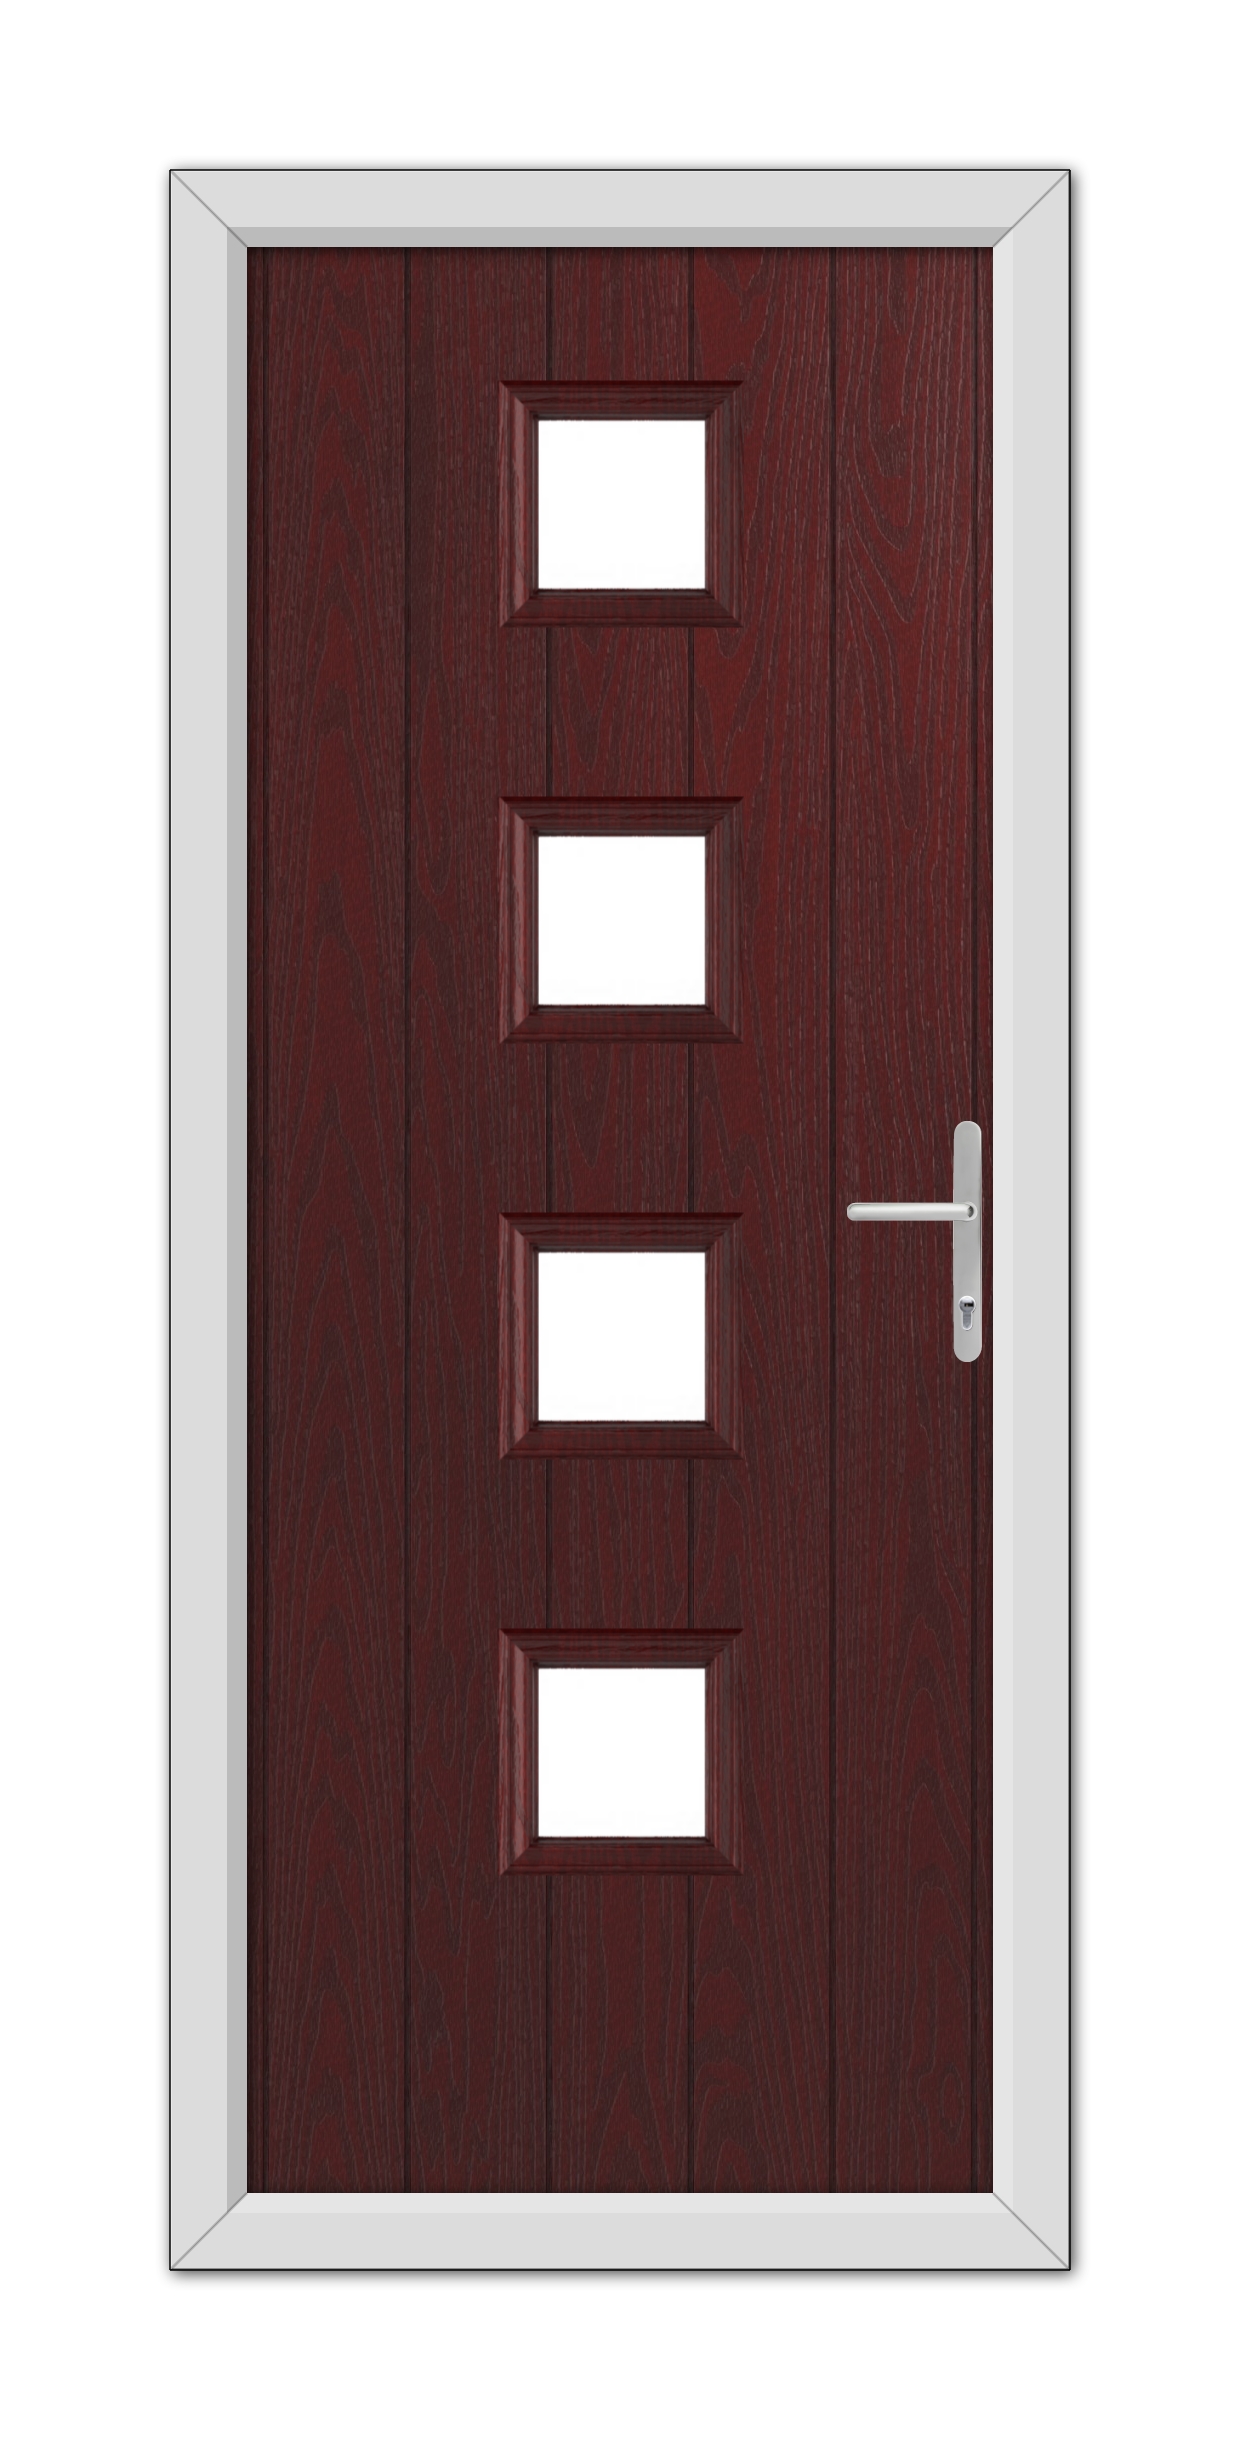 A Rosewood Hamilton Composite Door 48mm Timber Core with a metallic handle and five horizontal rectangular glass panels, framed by a white trim.